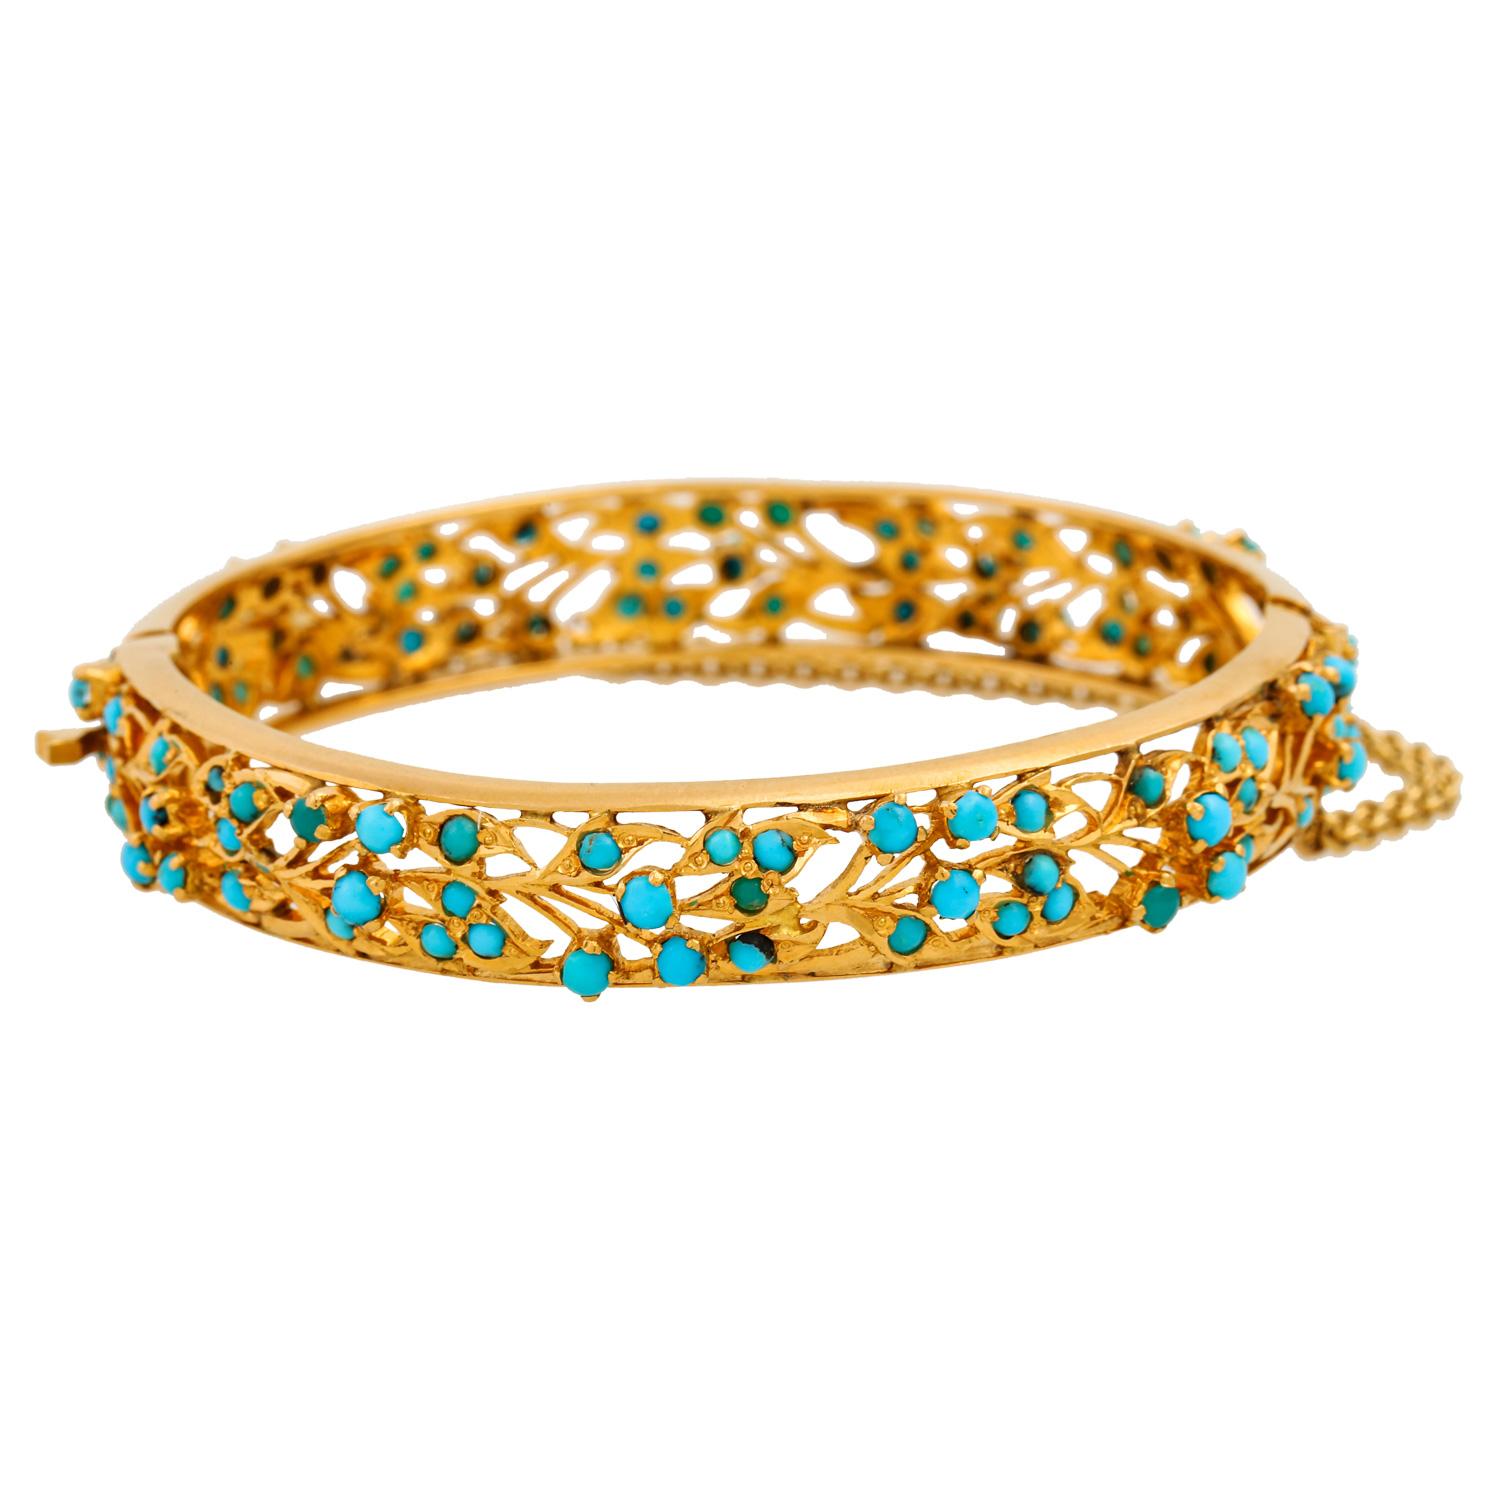 Women's Filigree Bangle with Turquoise Cabochon For Sale